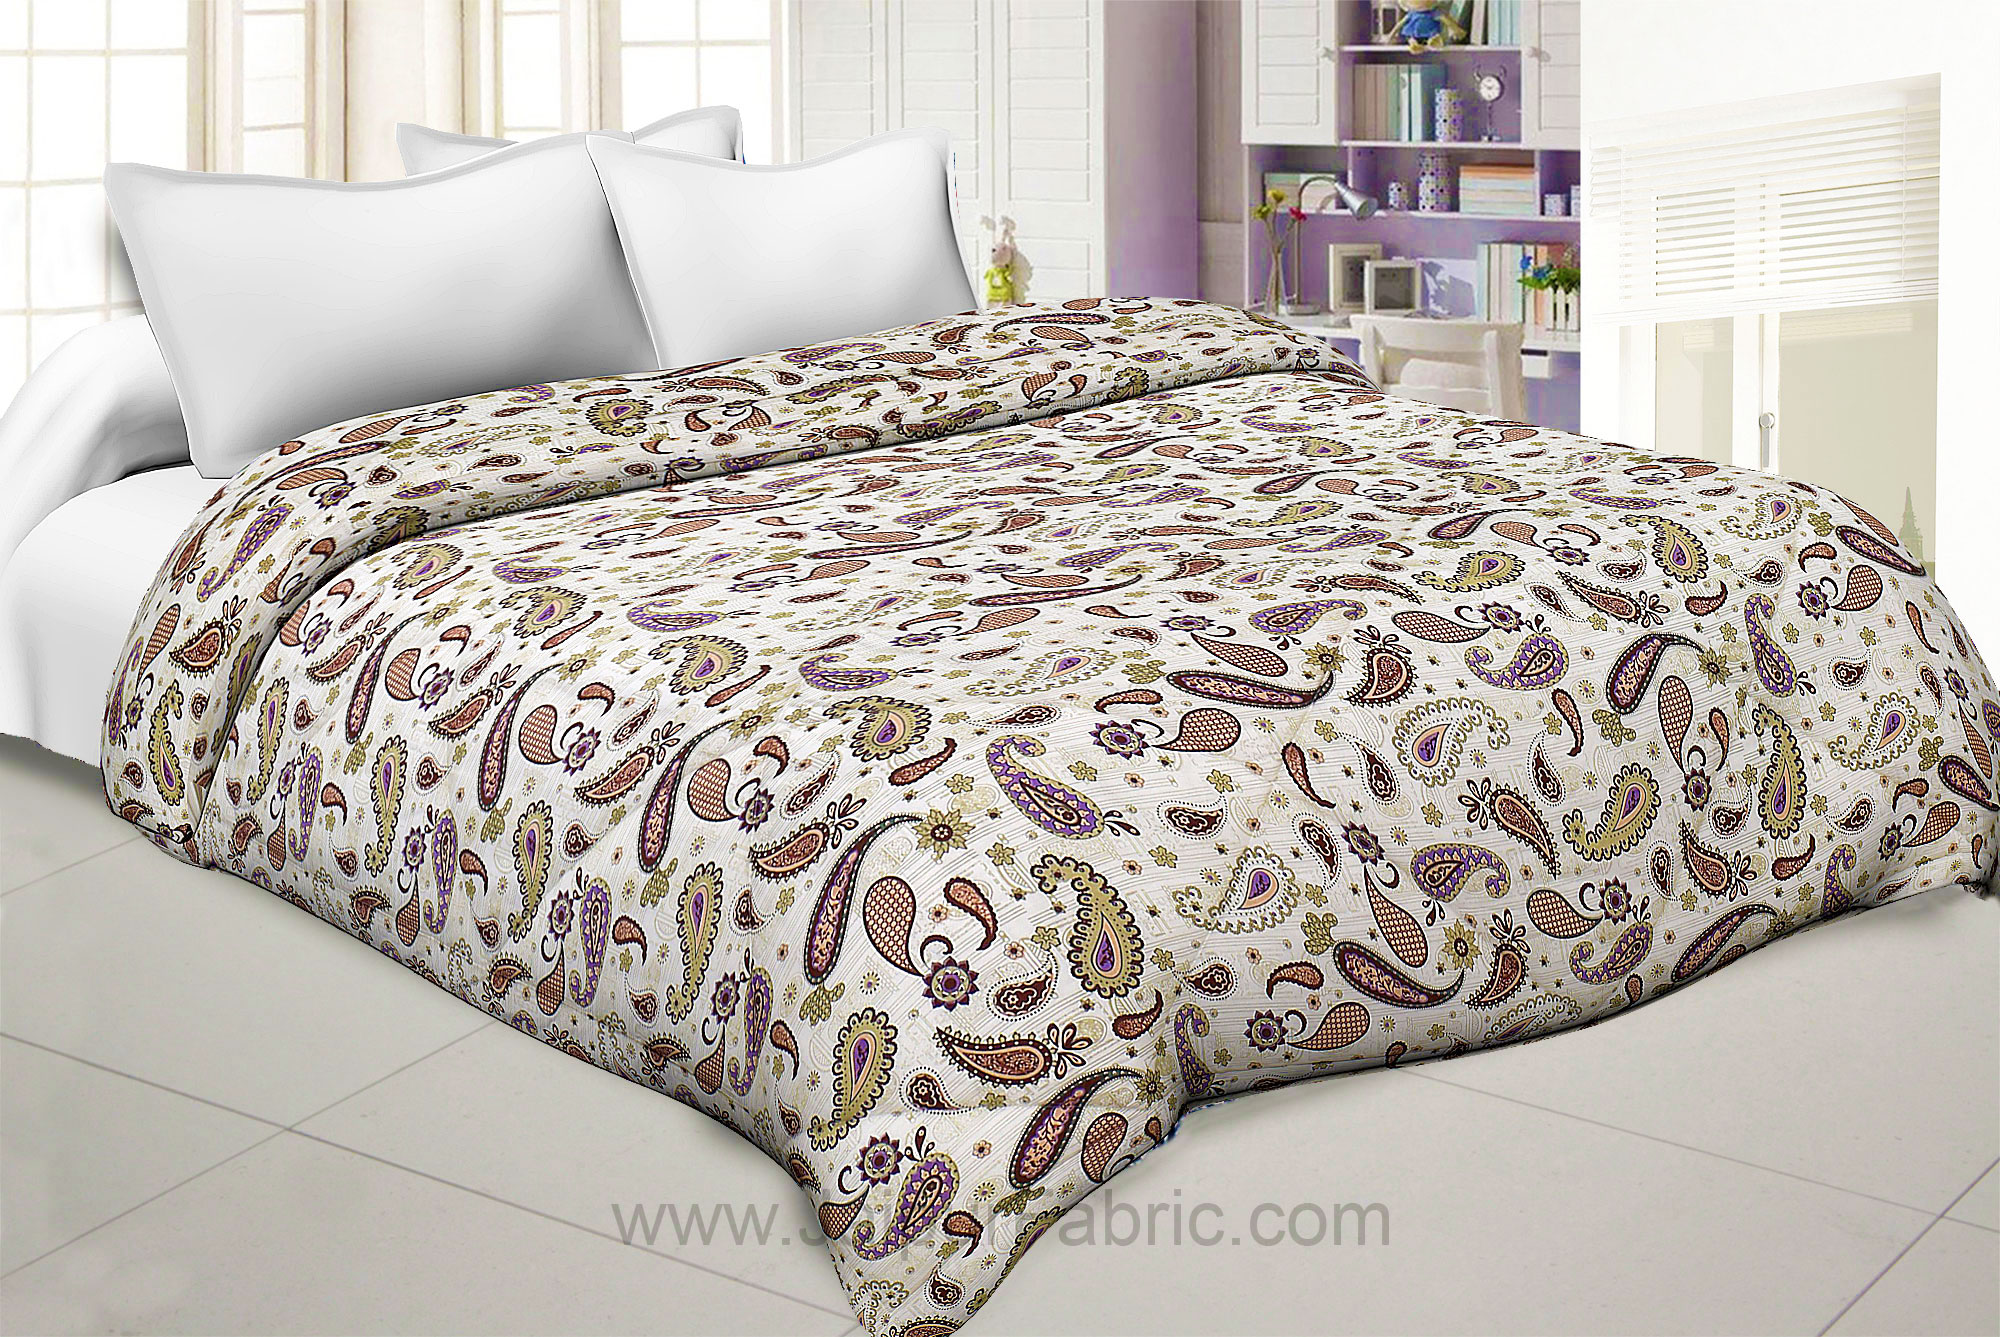 Paisley Creamish Pink Double Bed Comforter